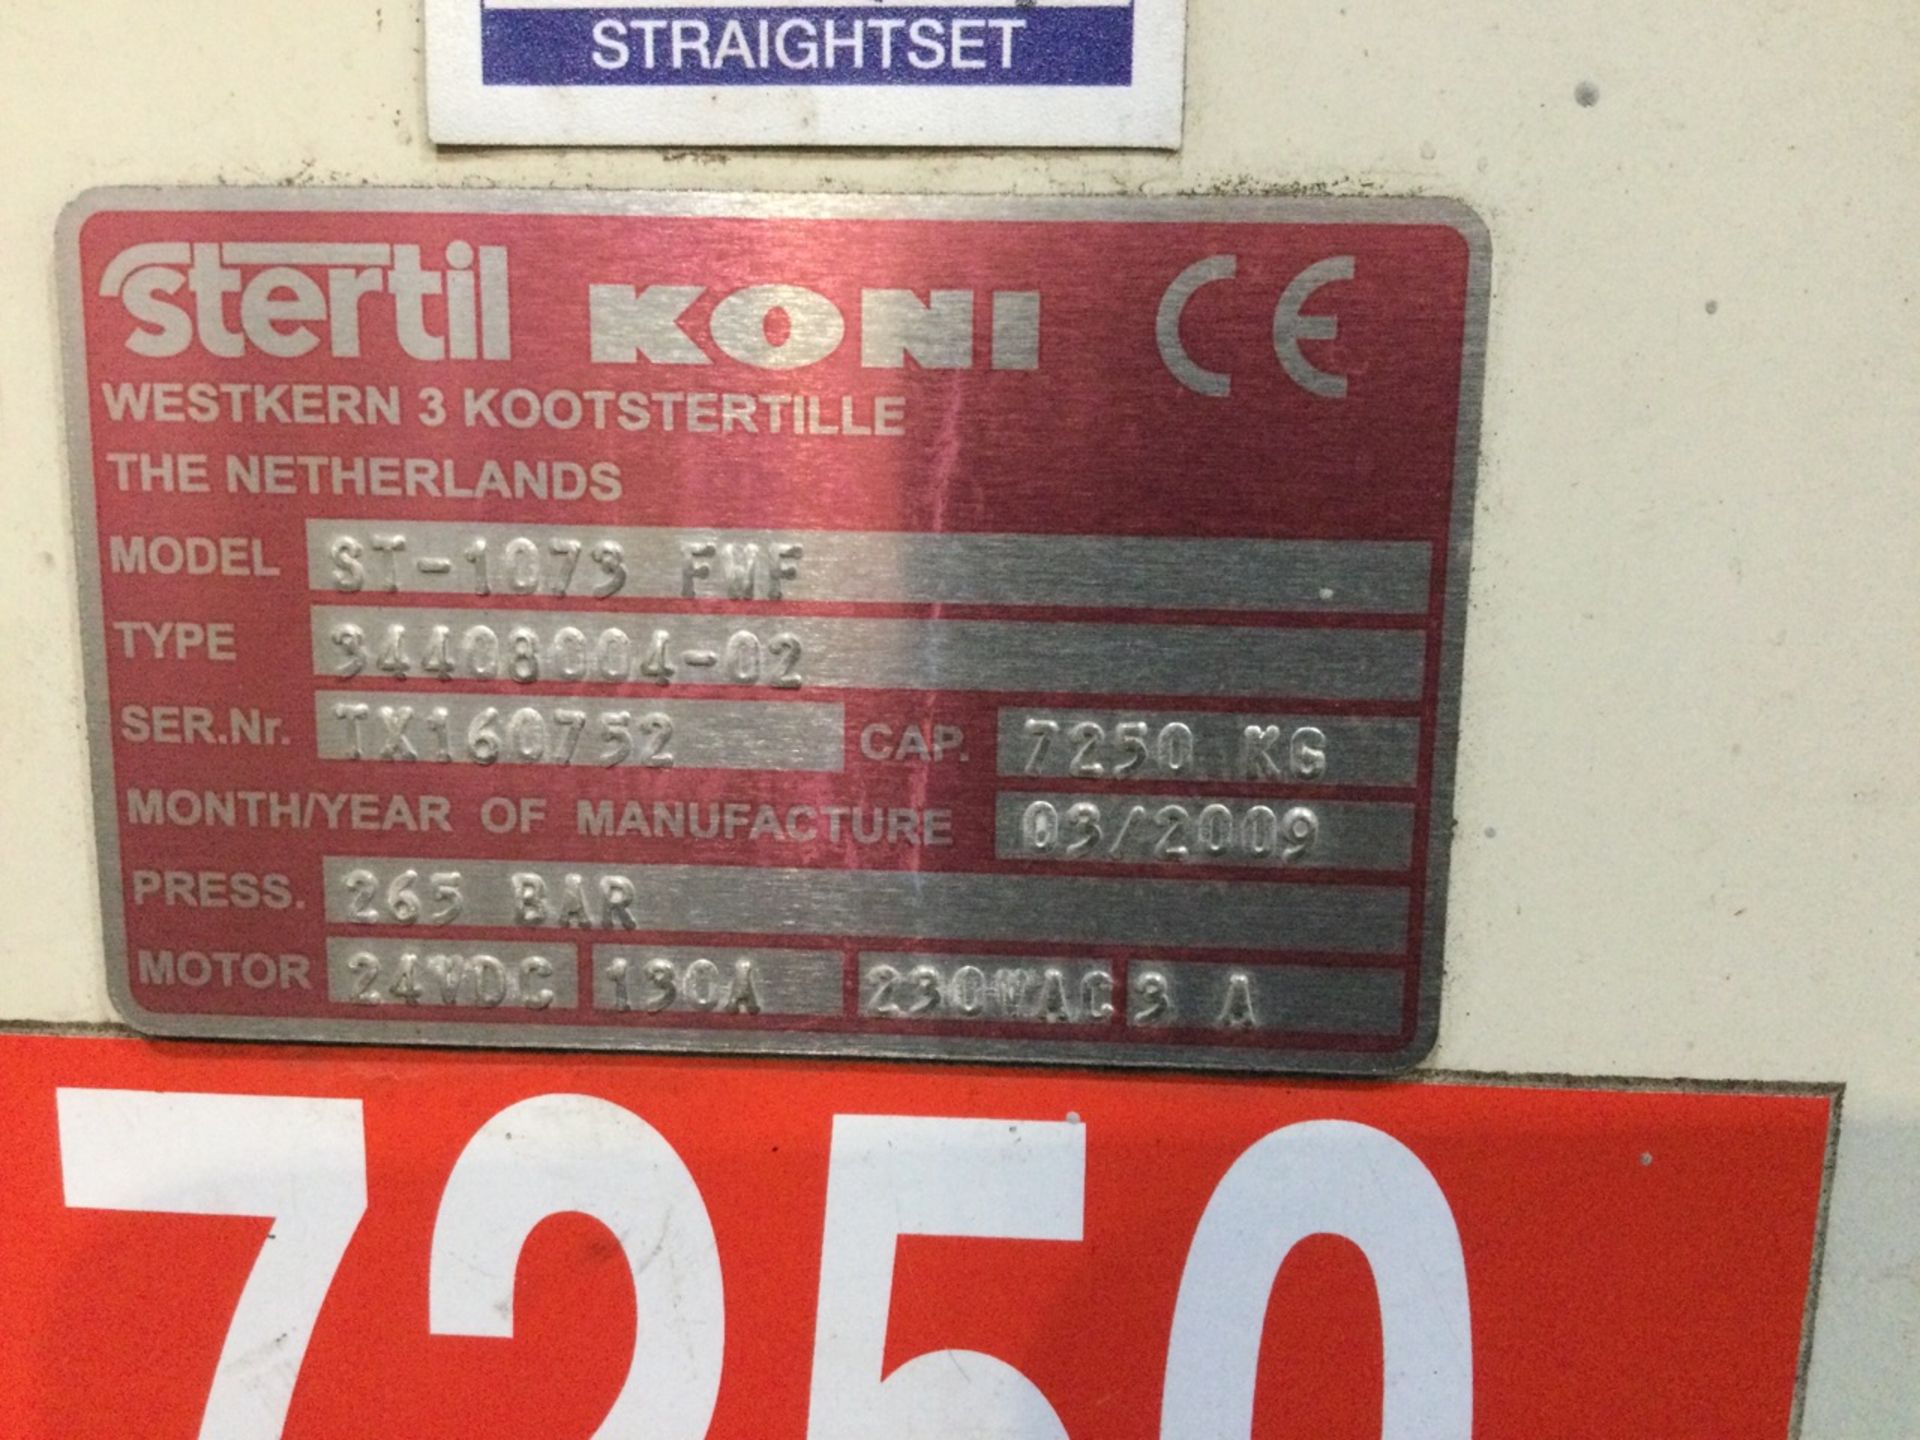 4: Stertil Koni ST-1073 FWF Wireless 7.25t Capacity Column Lifts, serial number TX160752; TX160754; - Image 2 of 6